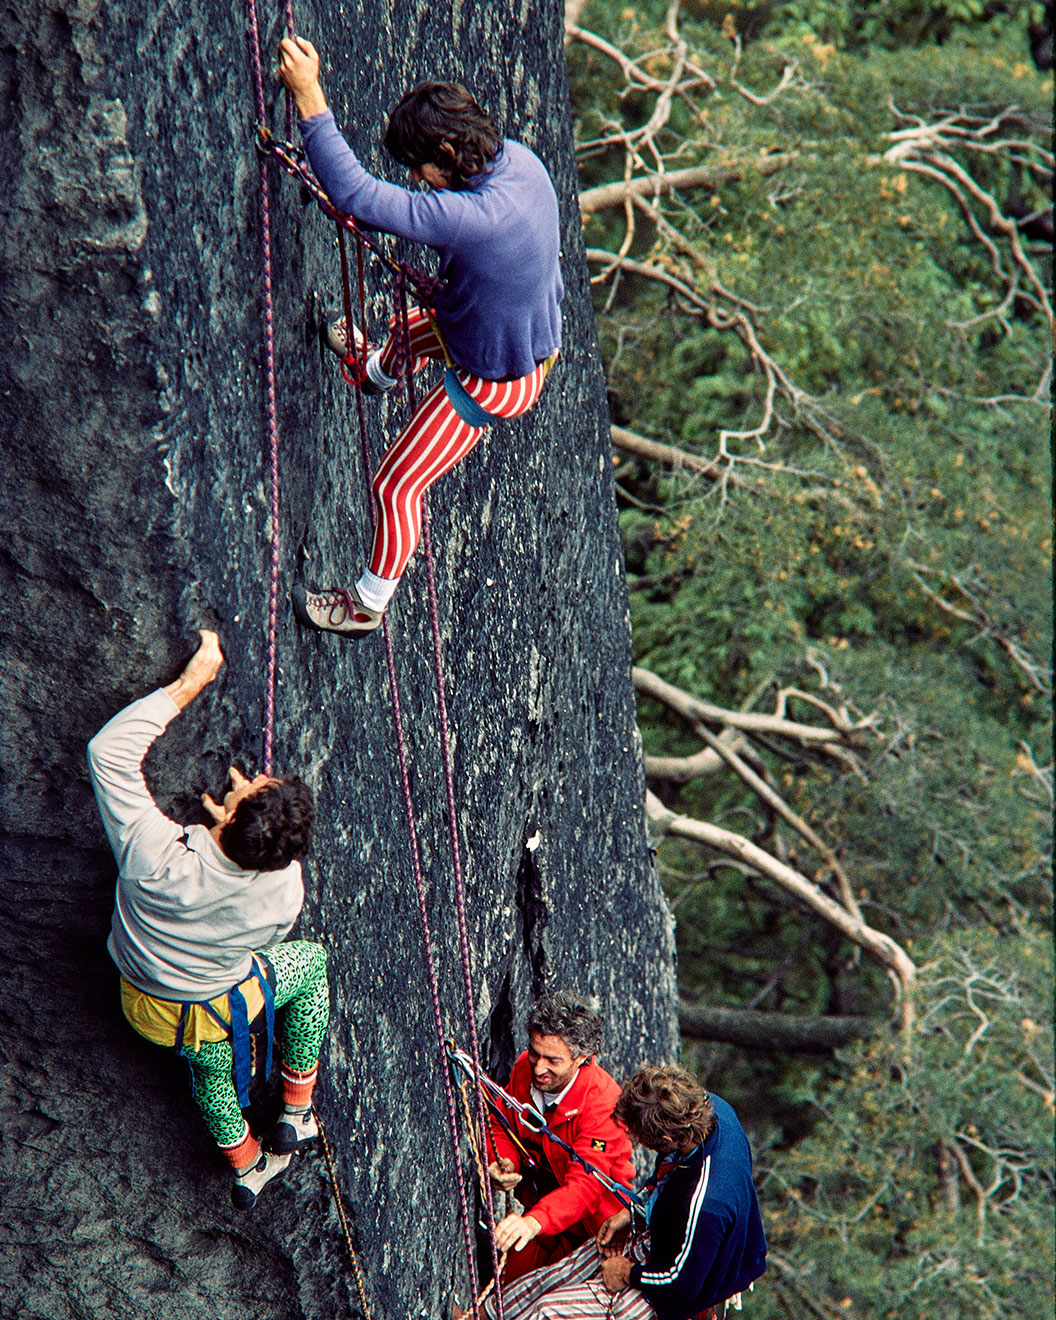 Four climbers hanging in a rockface in the Elbsandstein area in the 1990s